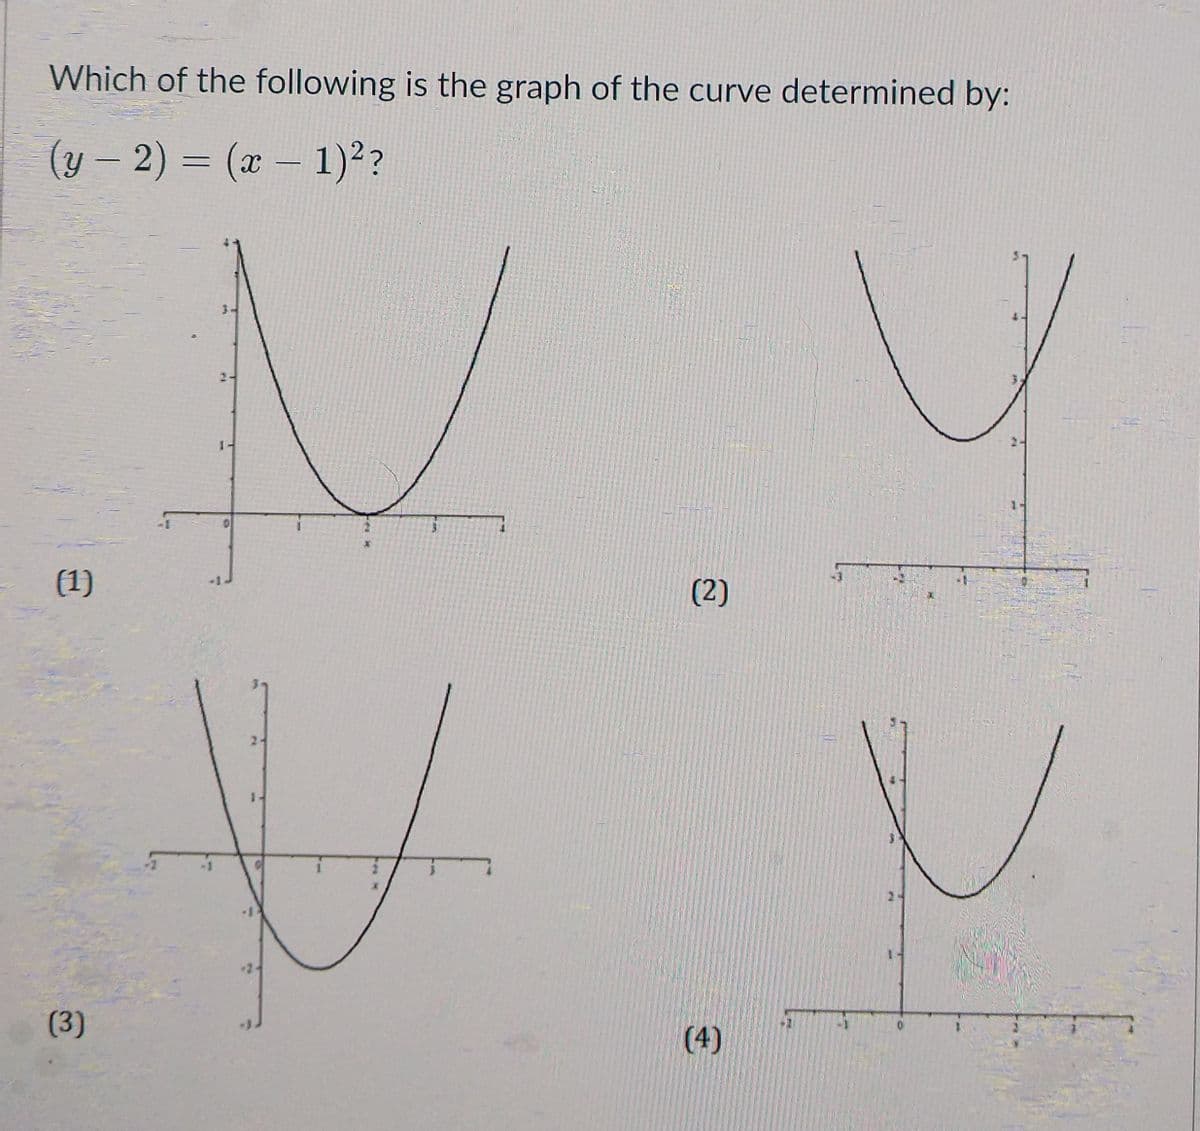 Which of the following is the graph of the curve determined by:
(y – 2) = (x – 1)²?
(1)
-1
(2)
(4)
(3)
